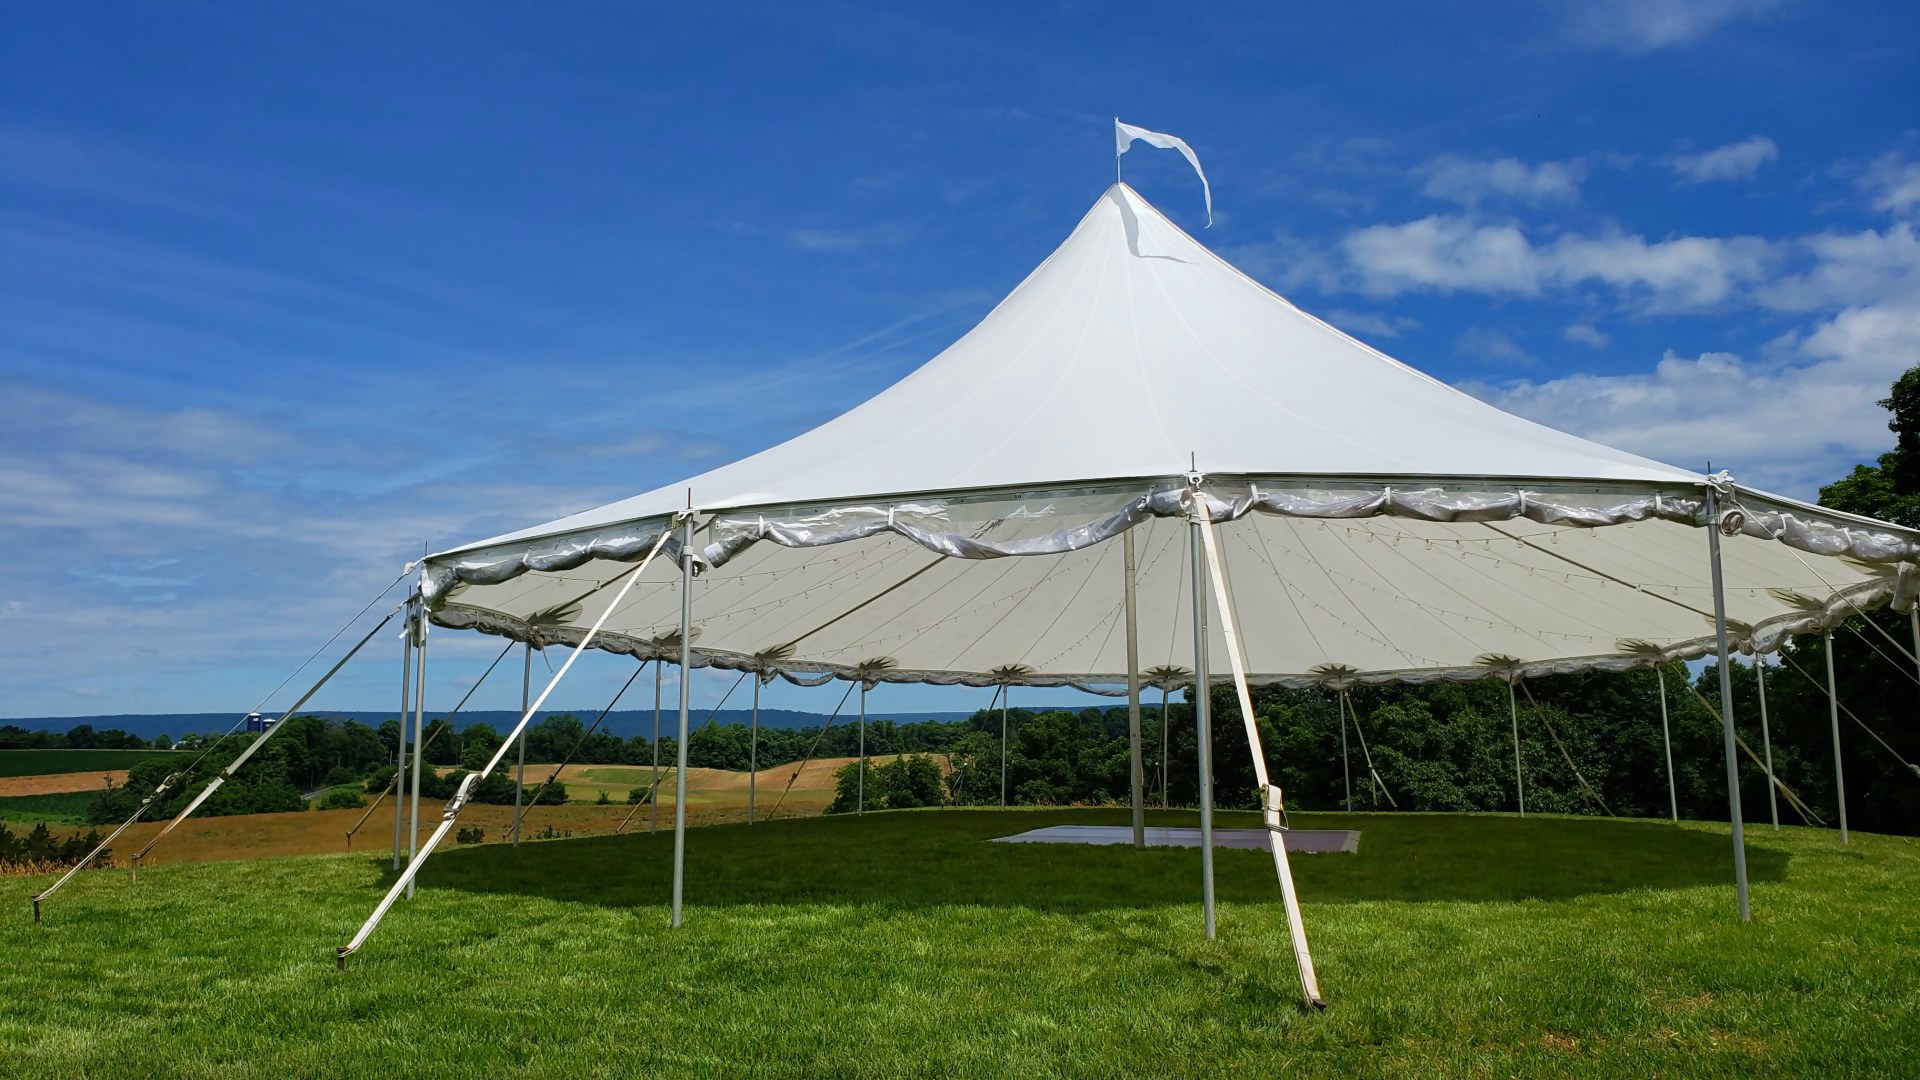 Beautiful sailcloth tent for rent in Gettysburg, PA